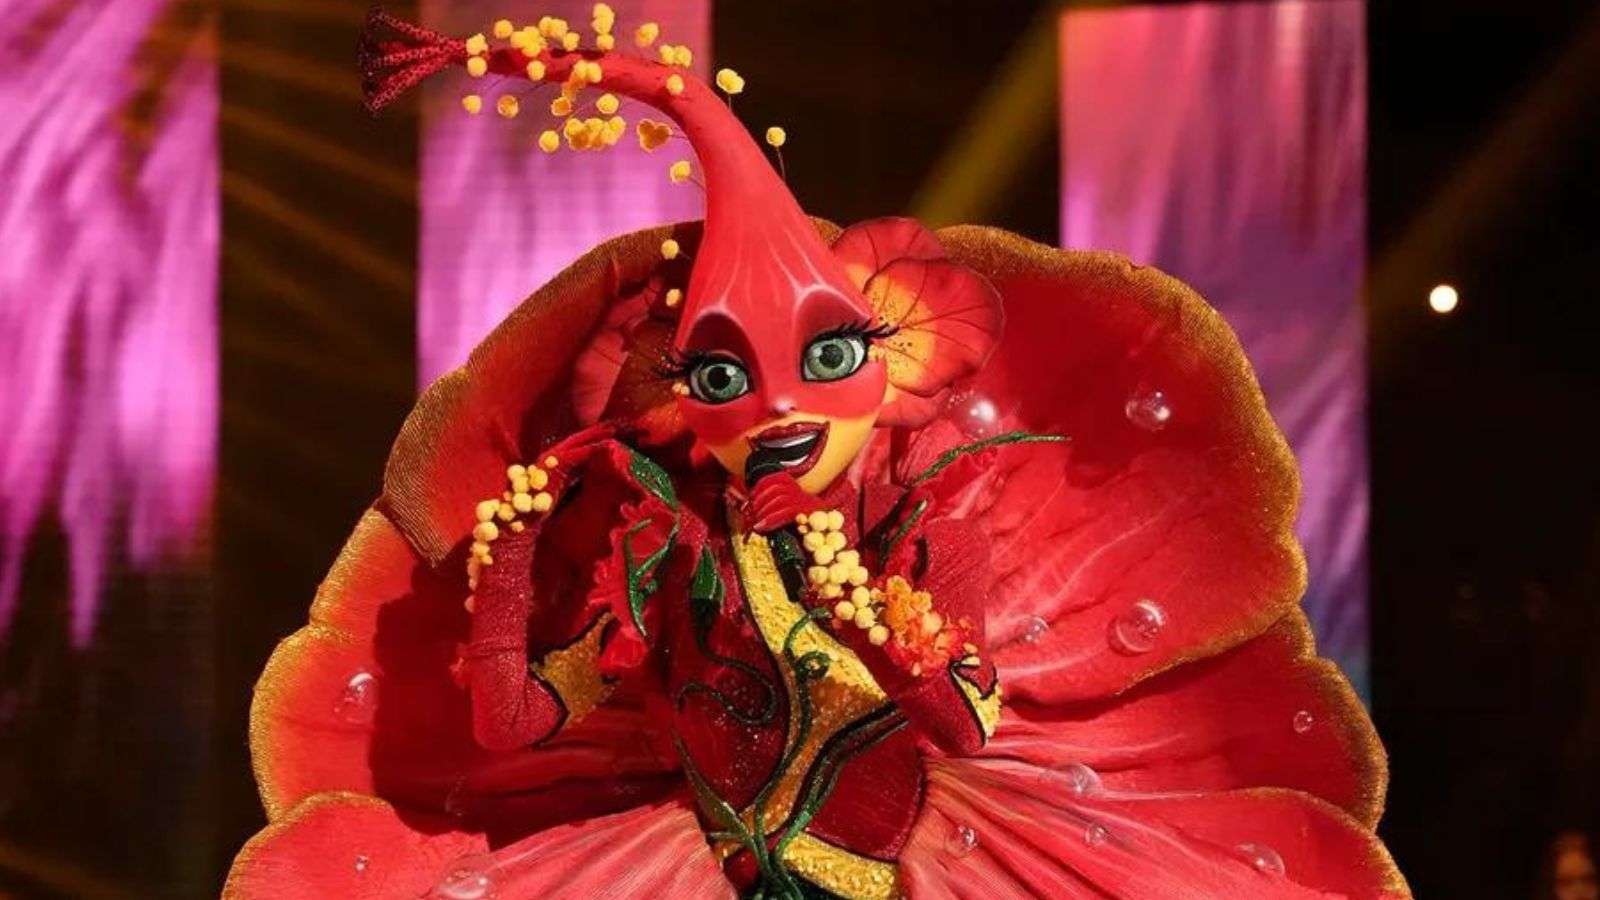 The hibiscus on The Masked Singer